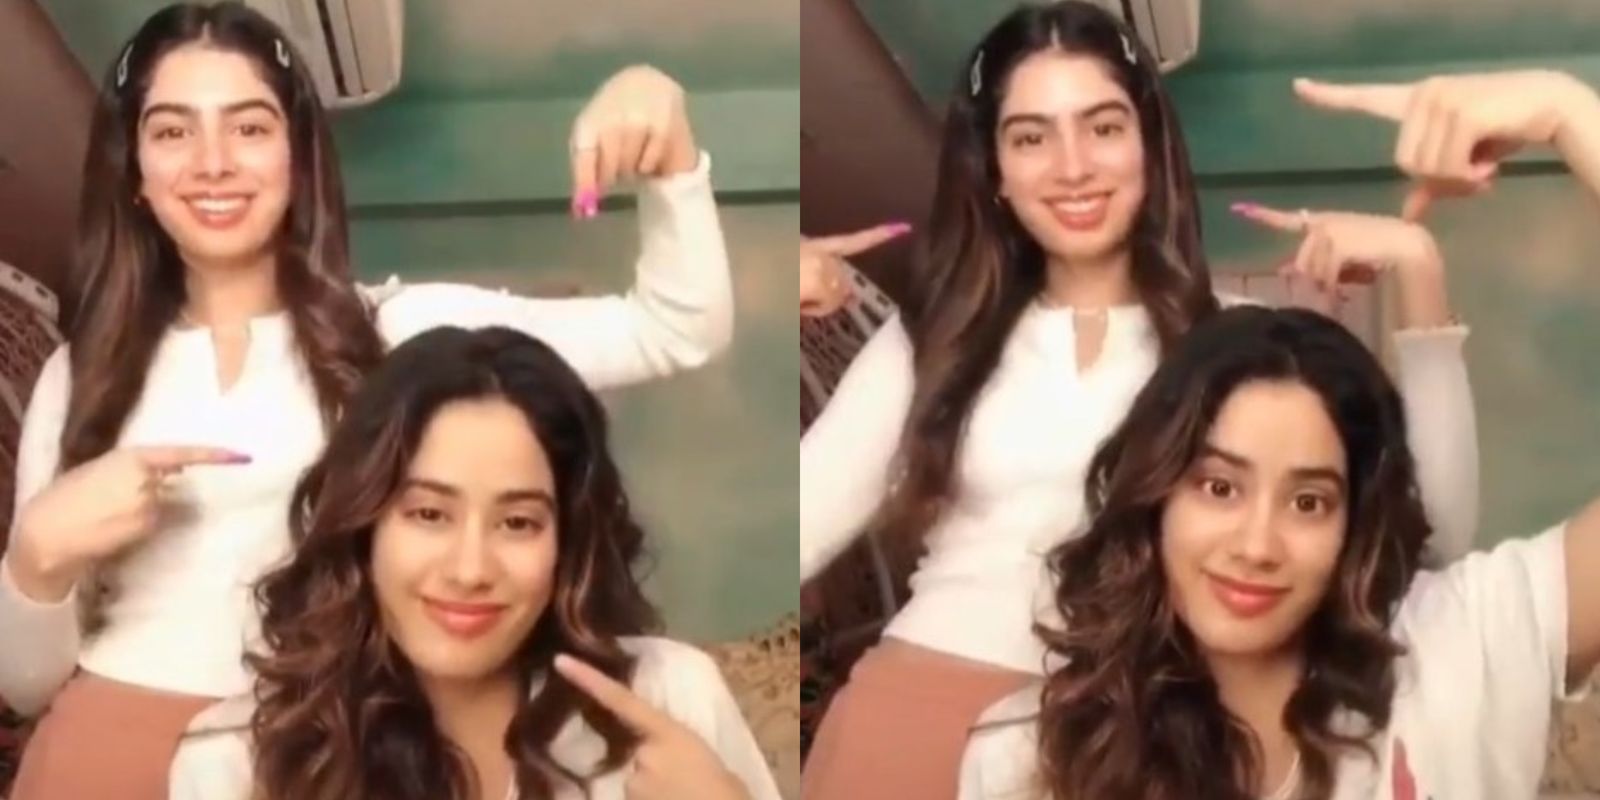 Janhvi Kapoor Takes The ‘Who Is Most Likely To’ Challenge With Sister Khushi Kapoor; Watch